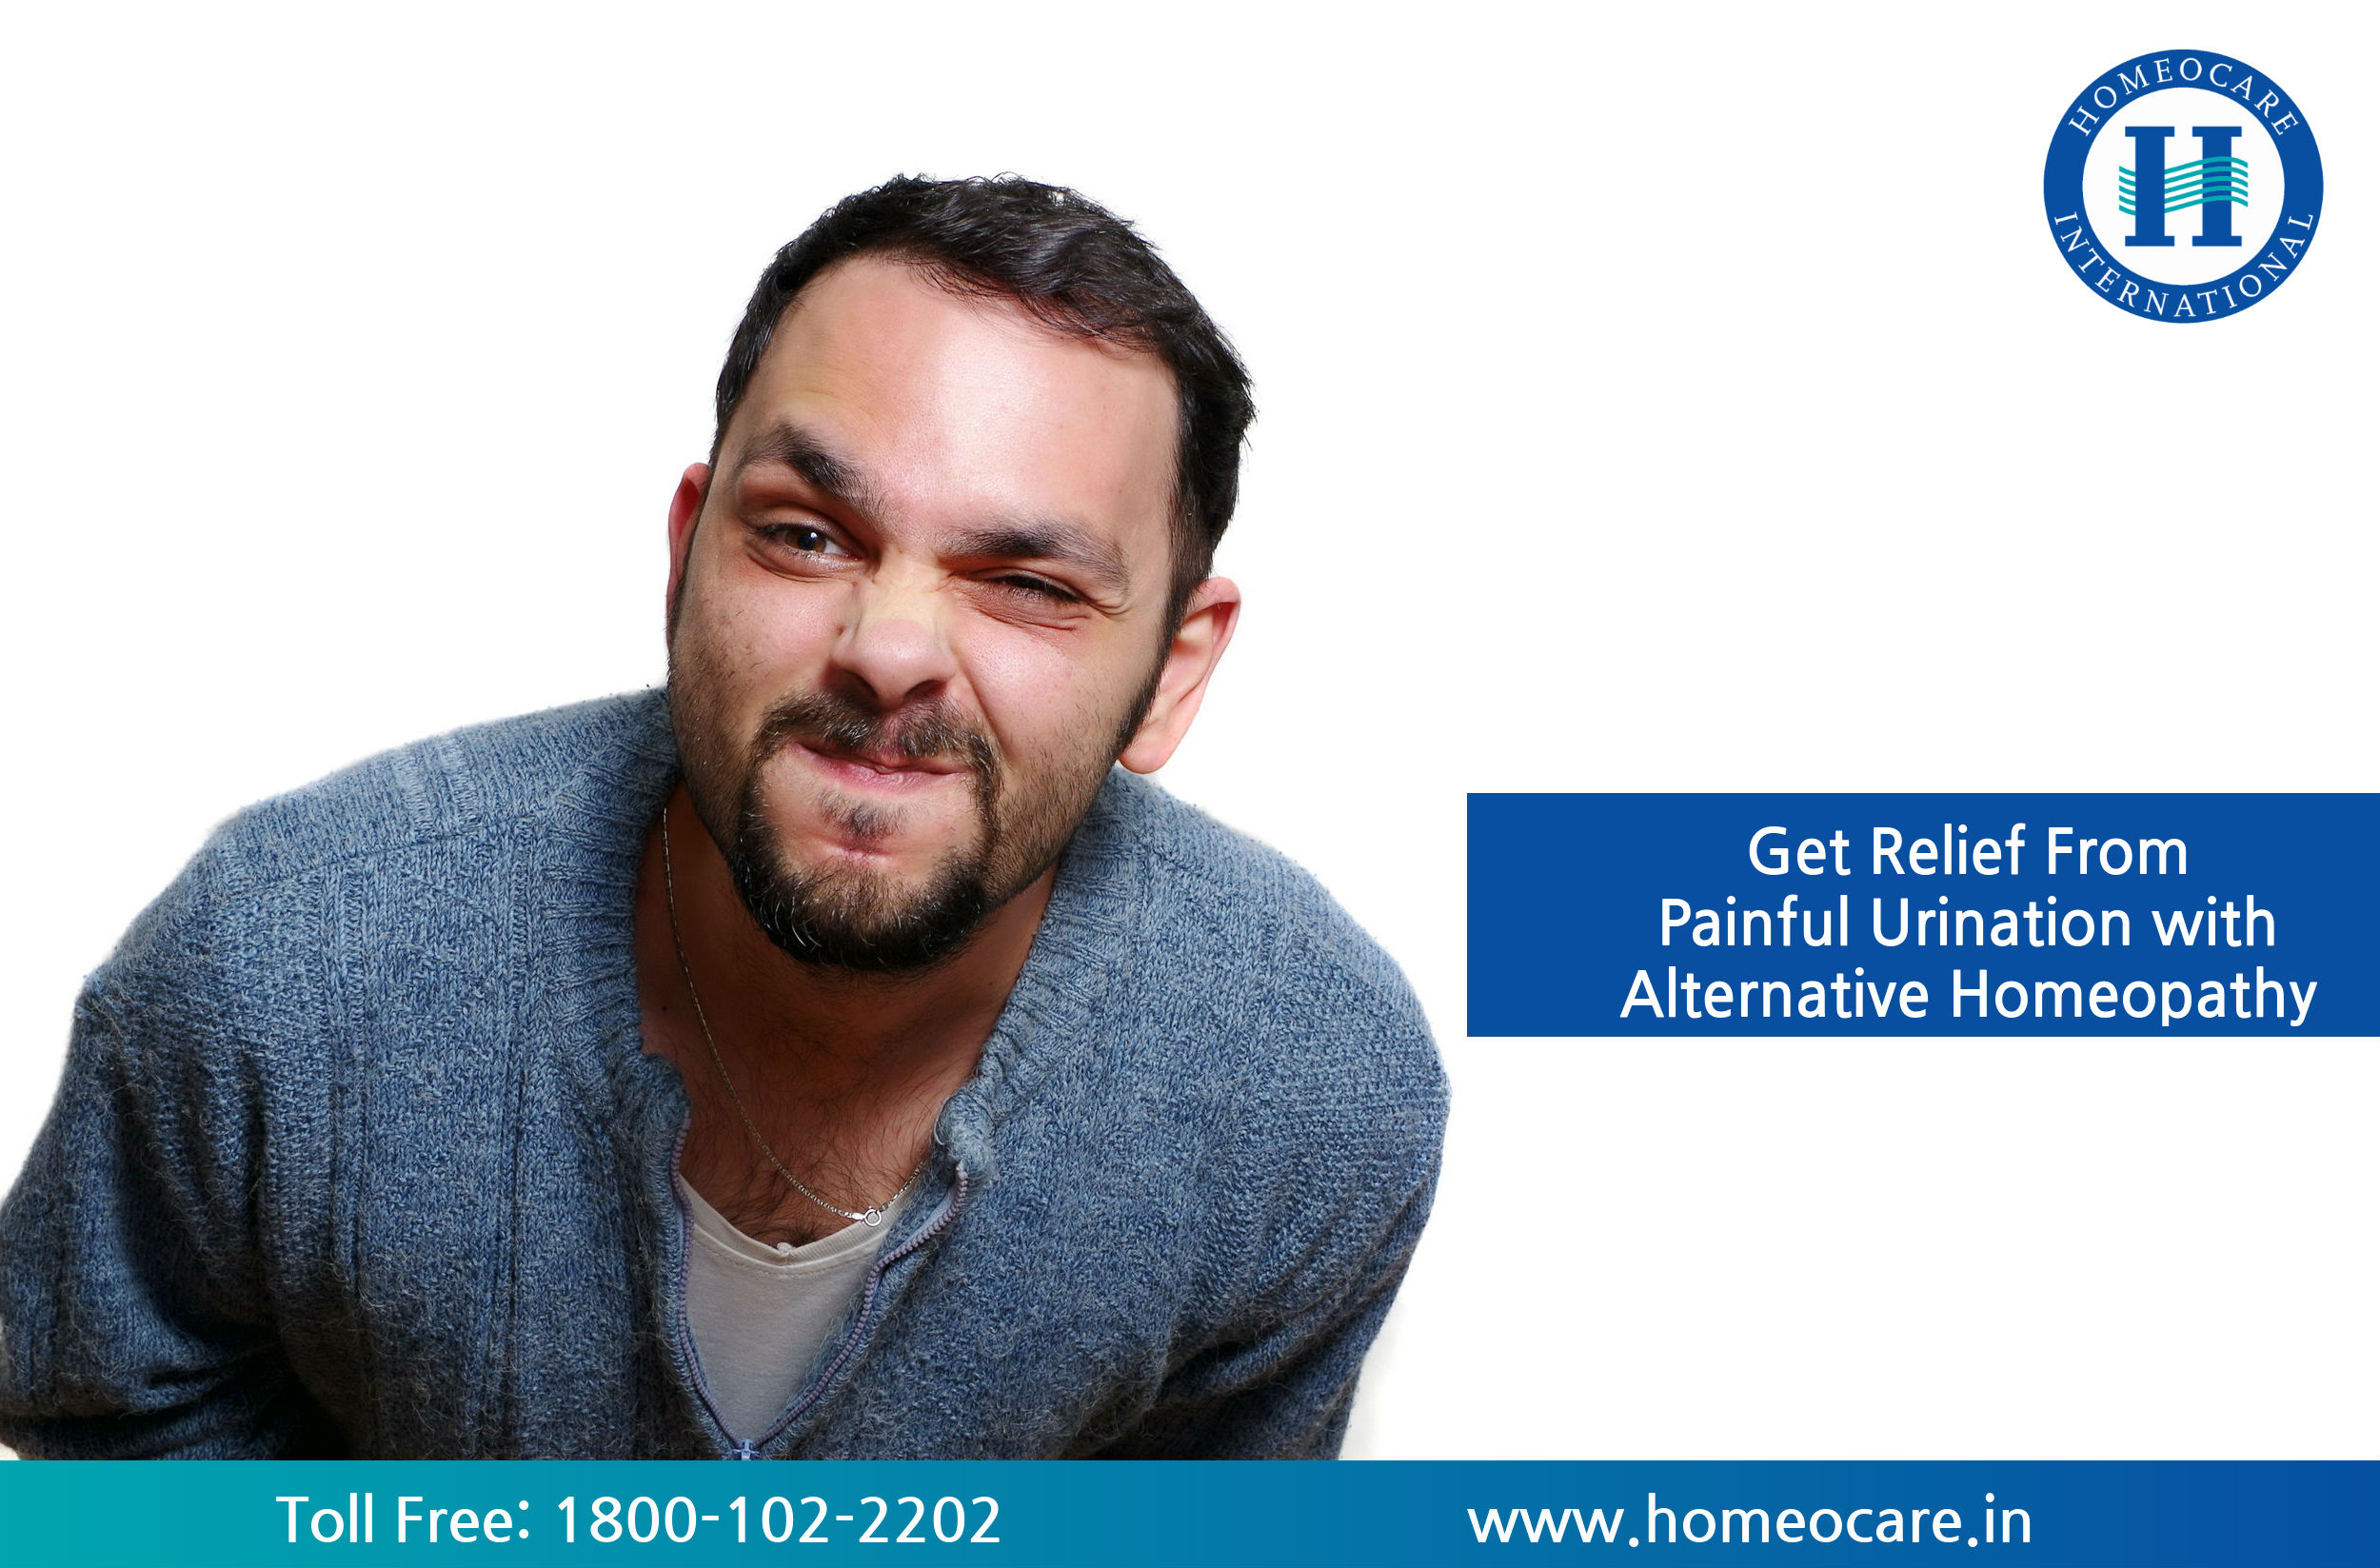 Get Relief From Painful Urination with Alternative Homeopathy